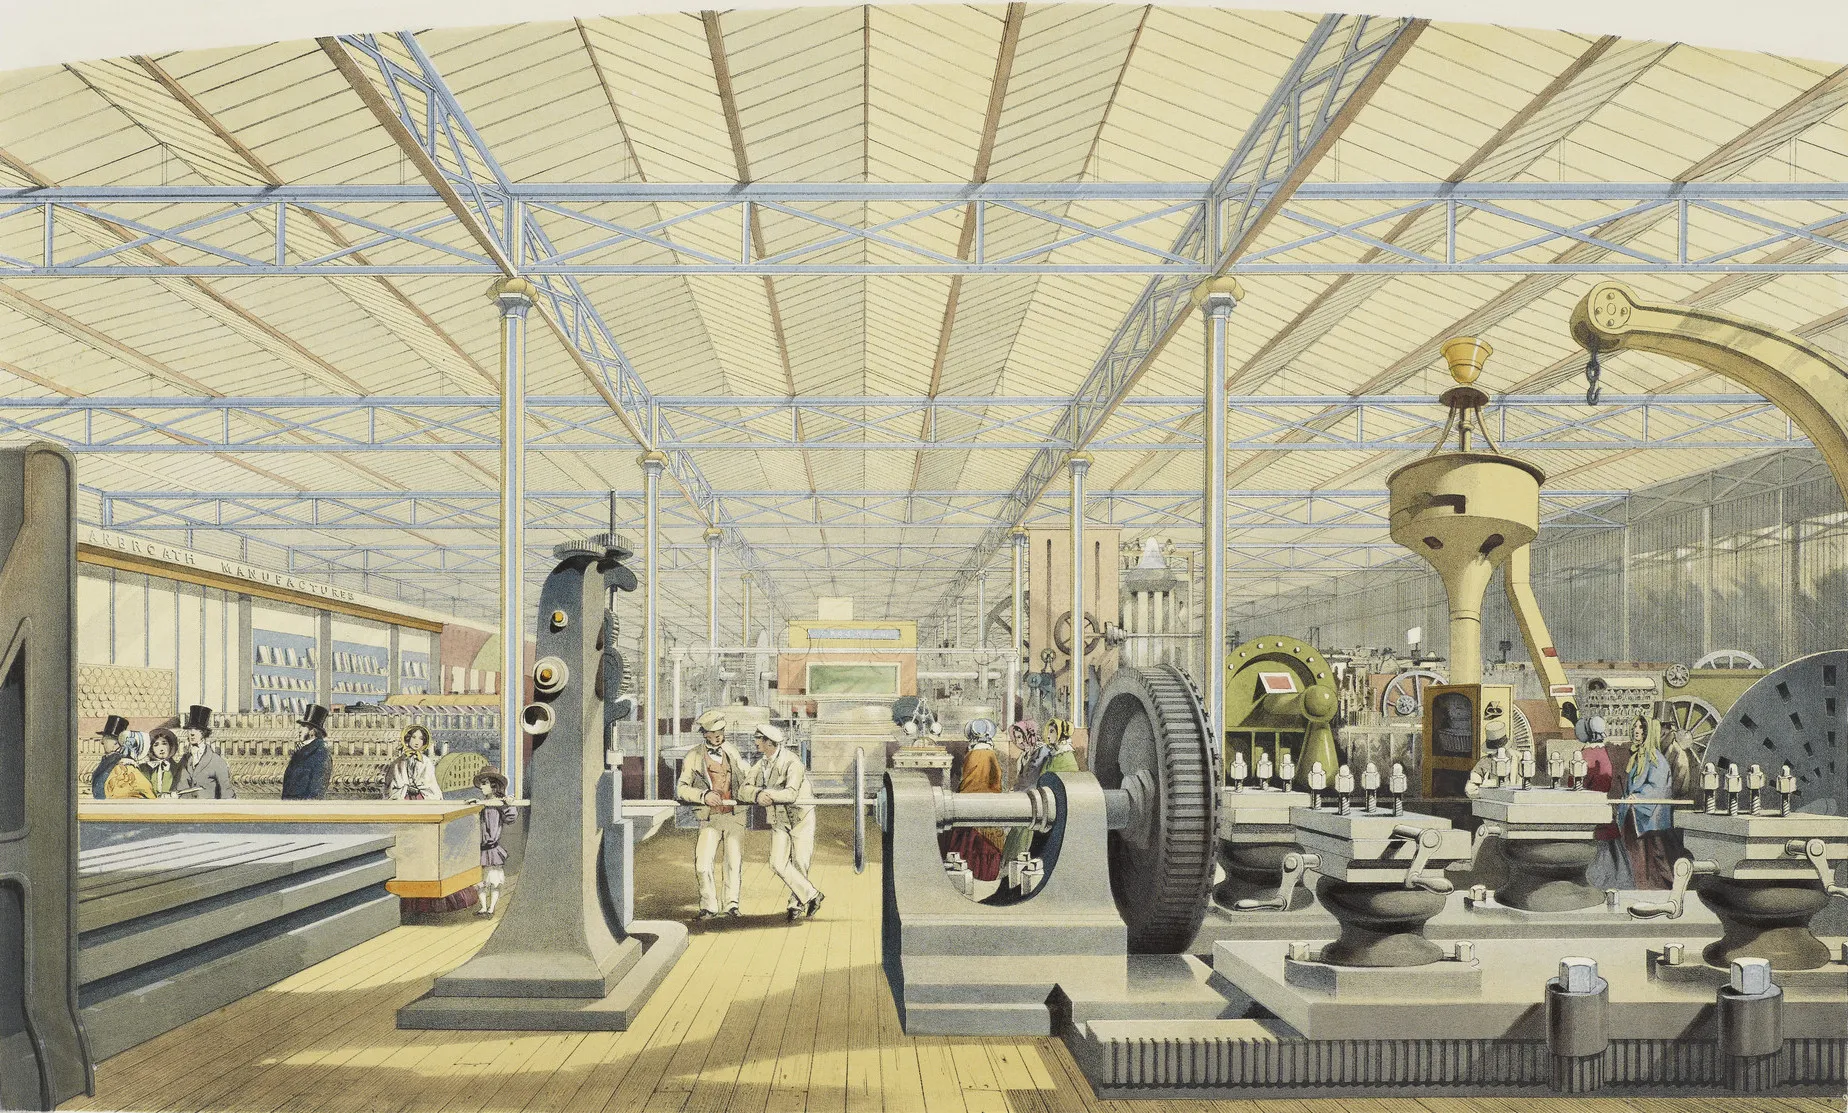 Photo showing: A view from The Great Exhibition of 1851.
" Objects Prominent -- Sketch taken from Whitworth's Stand of Machine Tools, for Planing, Slotting, Drilling, Boring, &c.; and introducing Fairbairn's Corn-mill, Wrought-iron Crane, Garforth's Rivetting Machine -- Johnson's Wire-drawing Machinery -- Gardner's Spinning Machinery -- Watkins's Coining Press -- Appold's Pump"